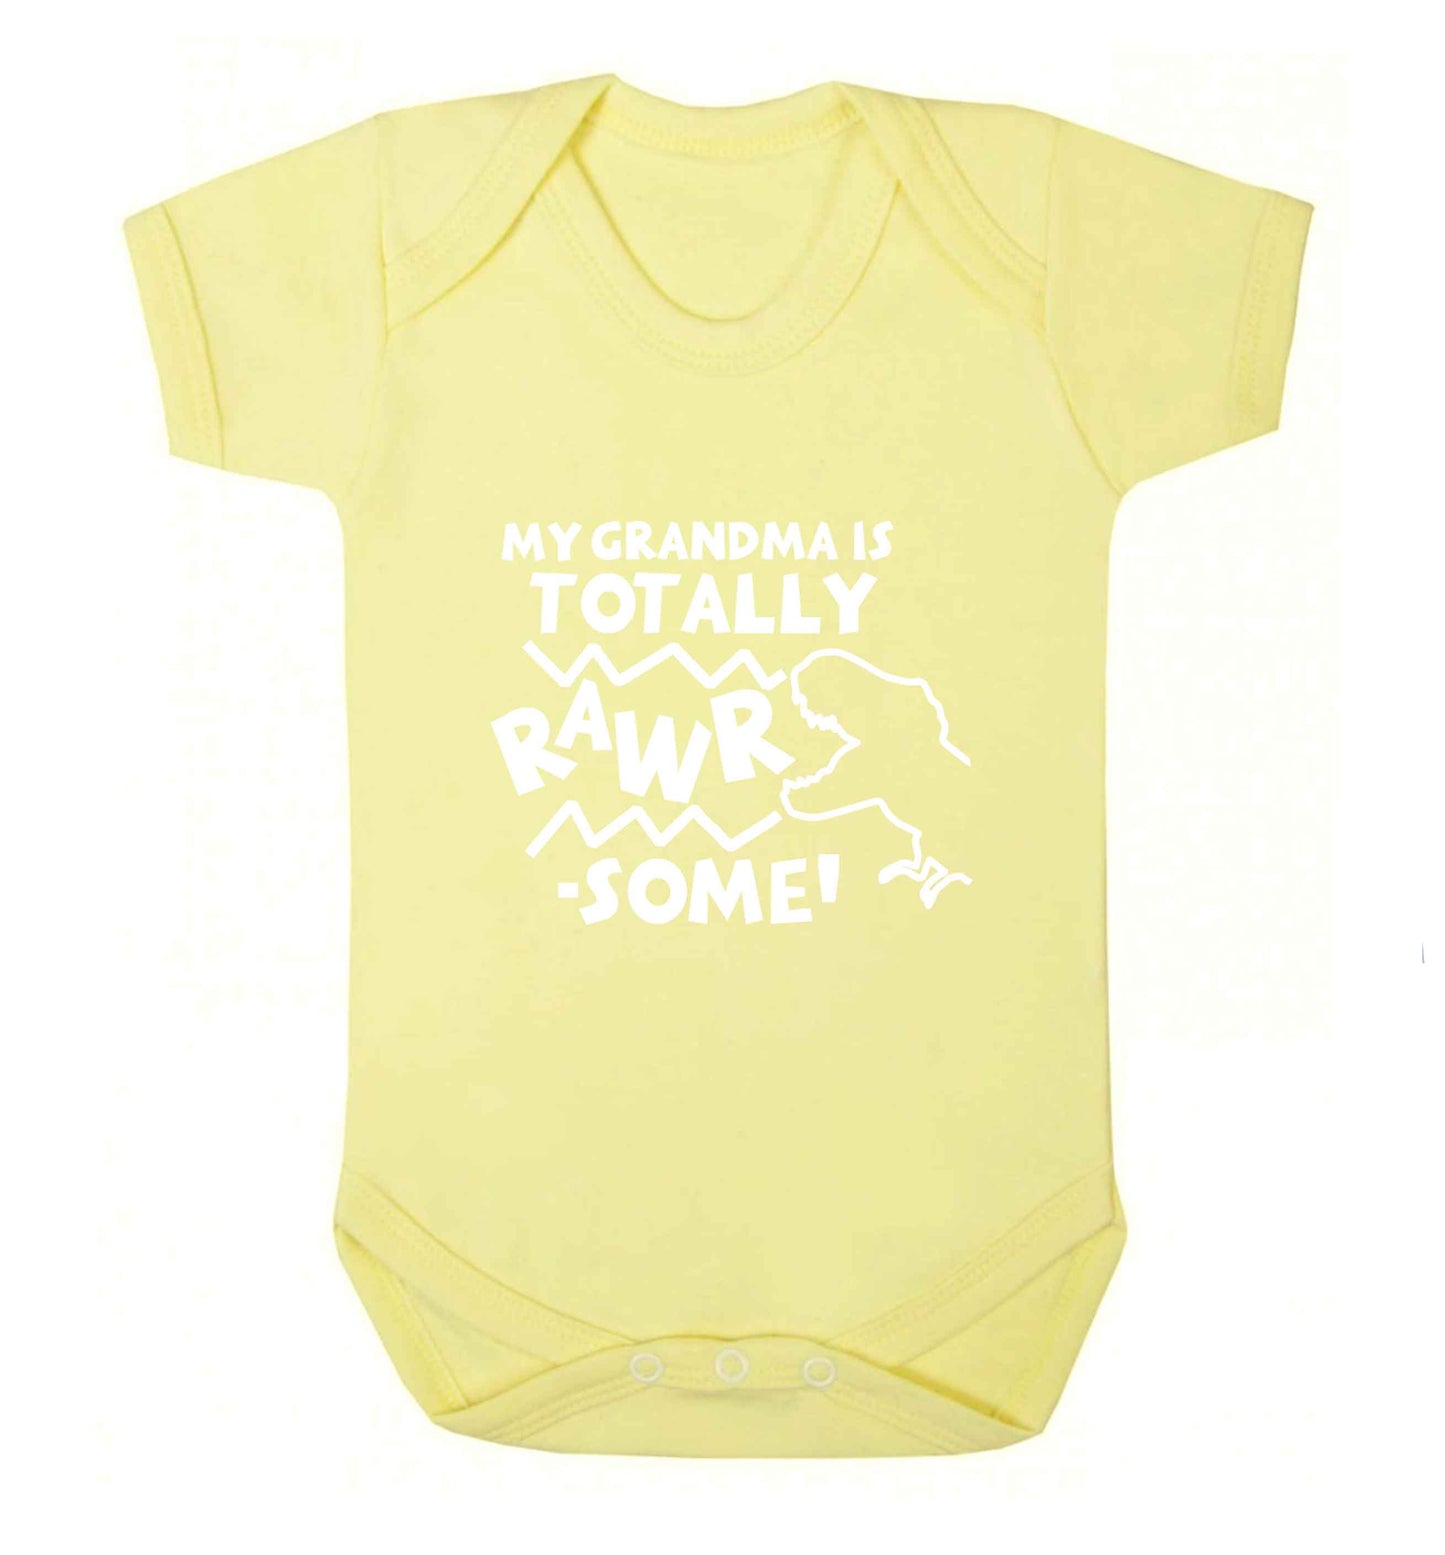 My grandma is totally rawrsome baby vest pale yellow 18-24 months